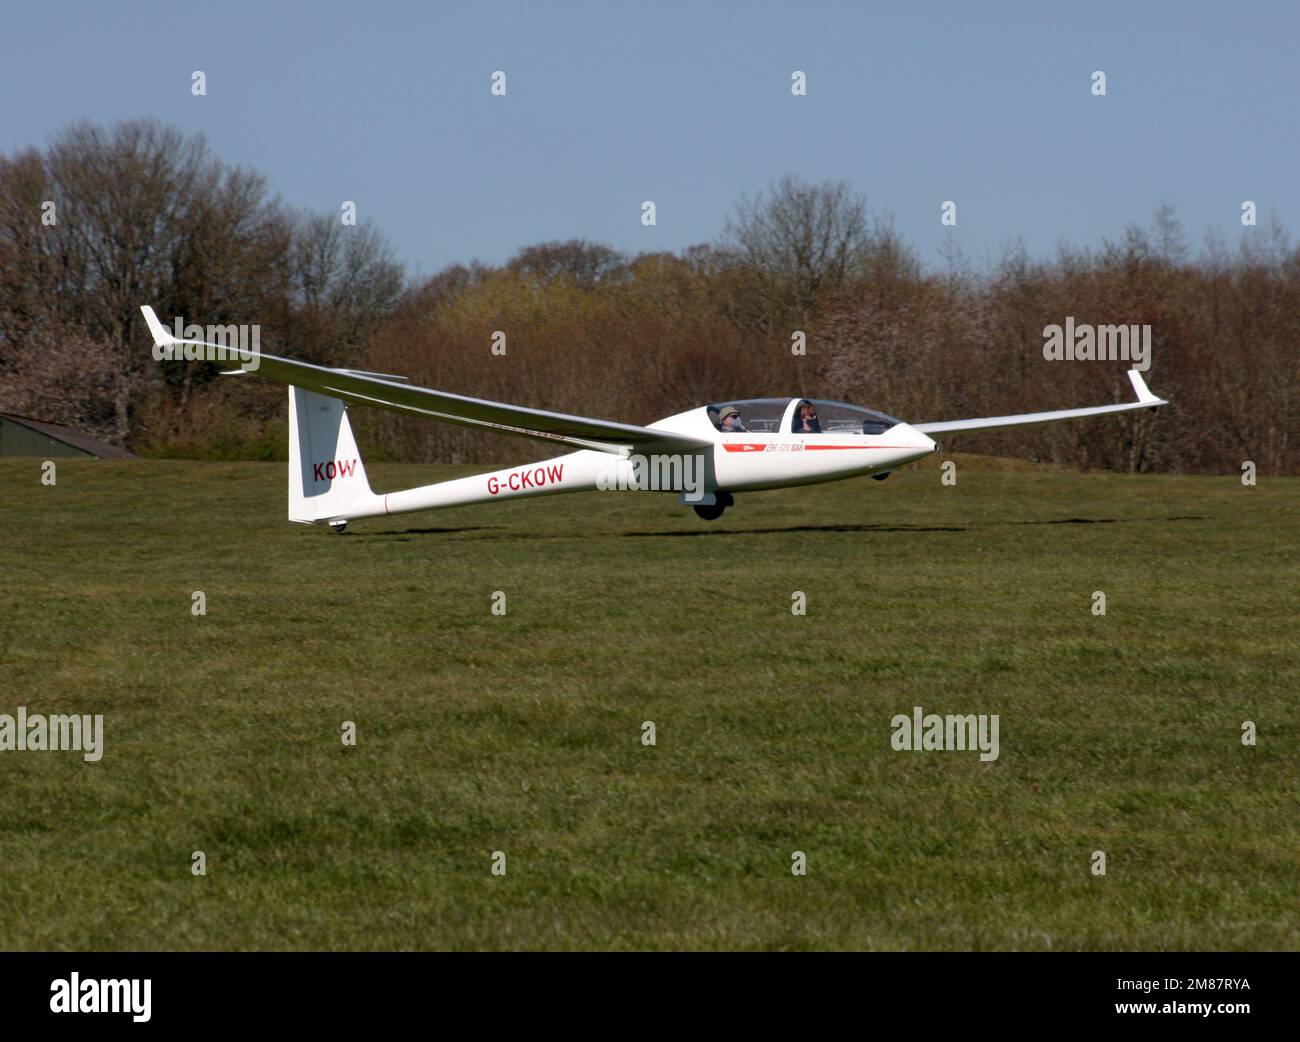 A Glaser-Dirks DG-505 Elan Orion glider touching down at a private airfield in West Sussex UK Stock Photo